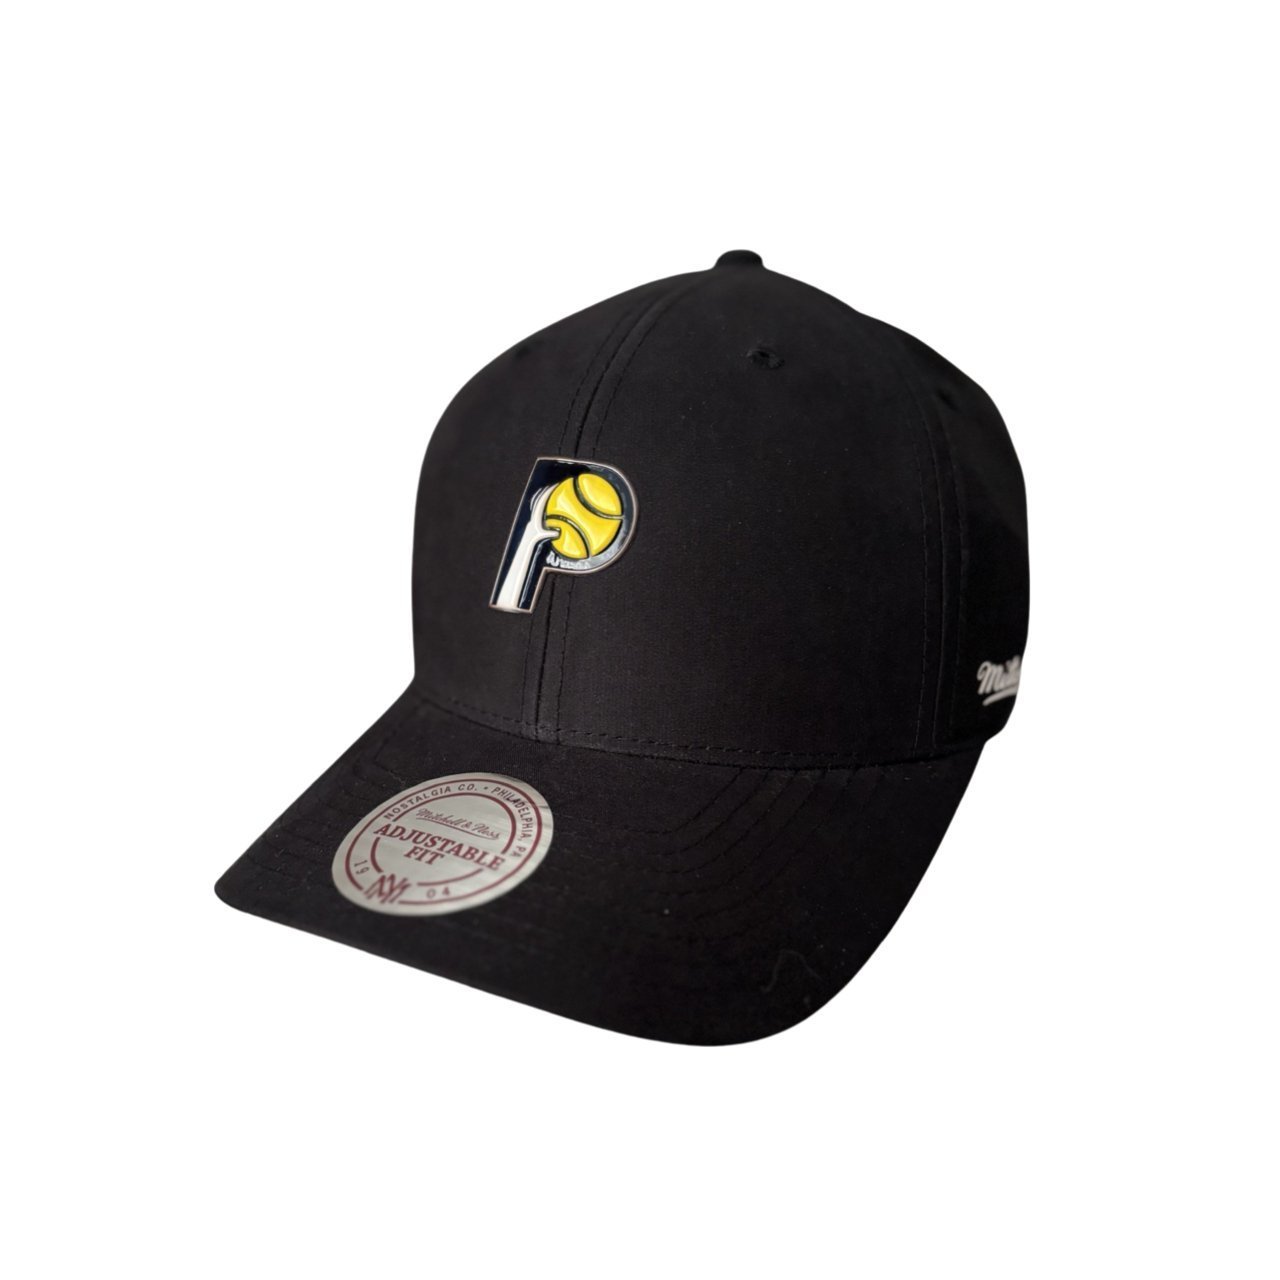 Indiana Pacers NBA Mitchell & Ness HWC Black Basketball Snapback Cap with Round Brim - Soul and Sense Streetwear